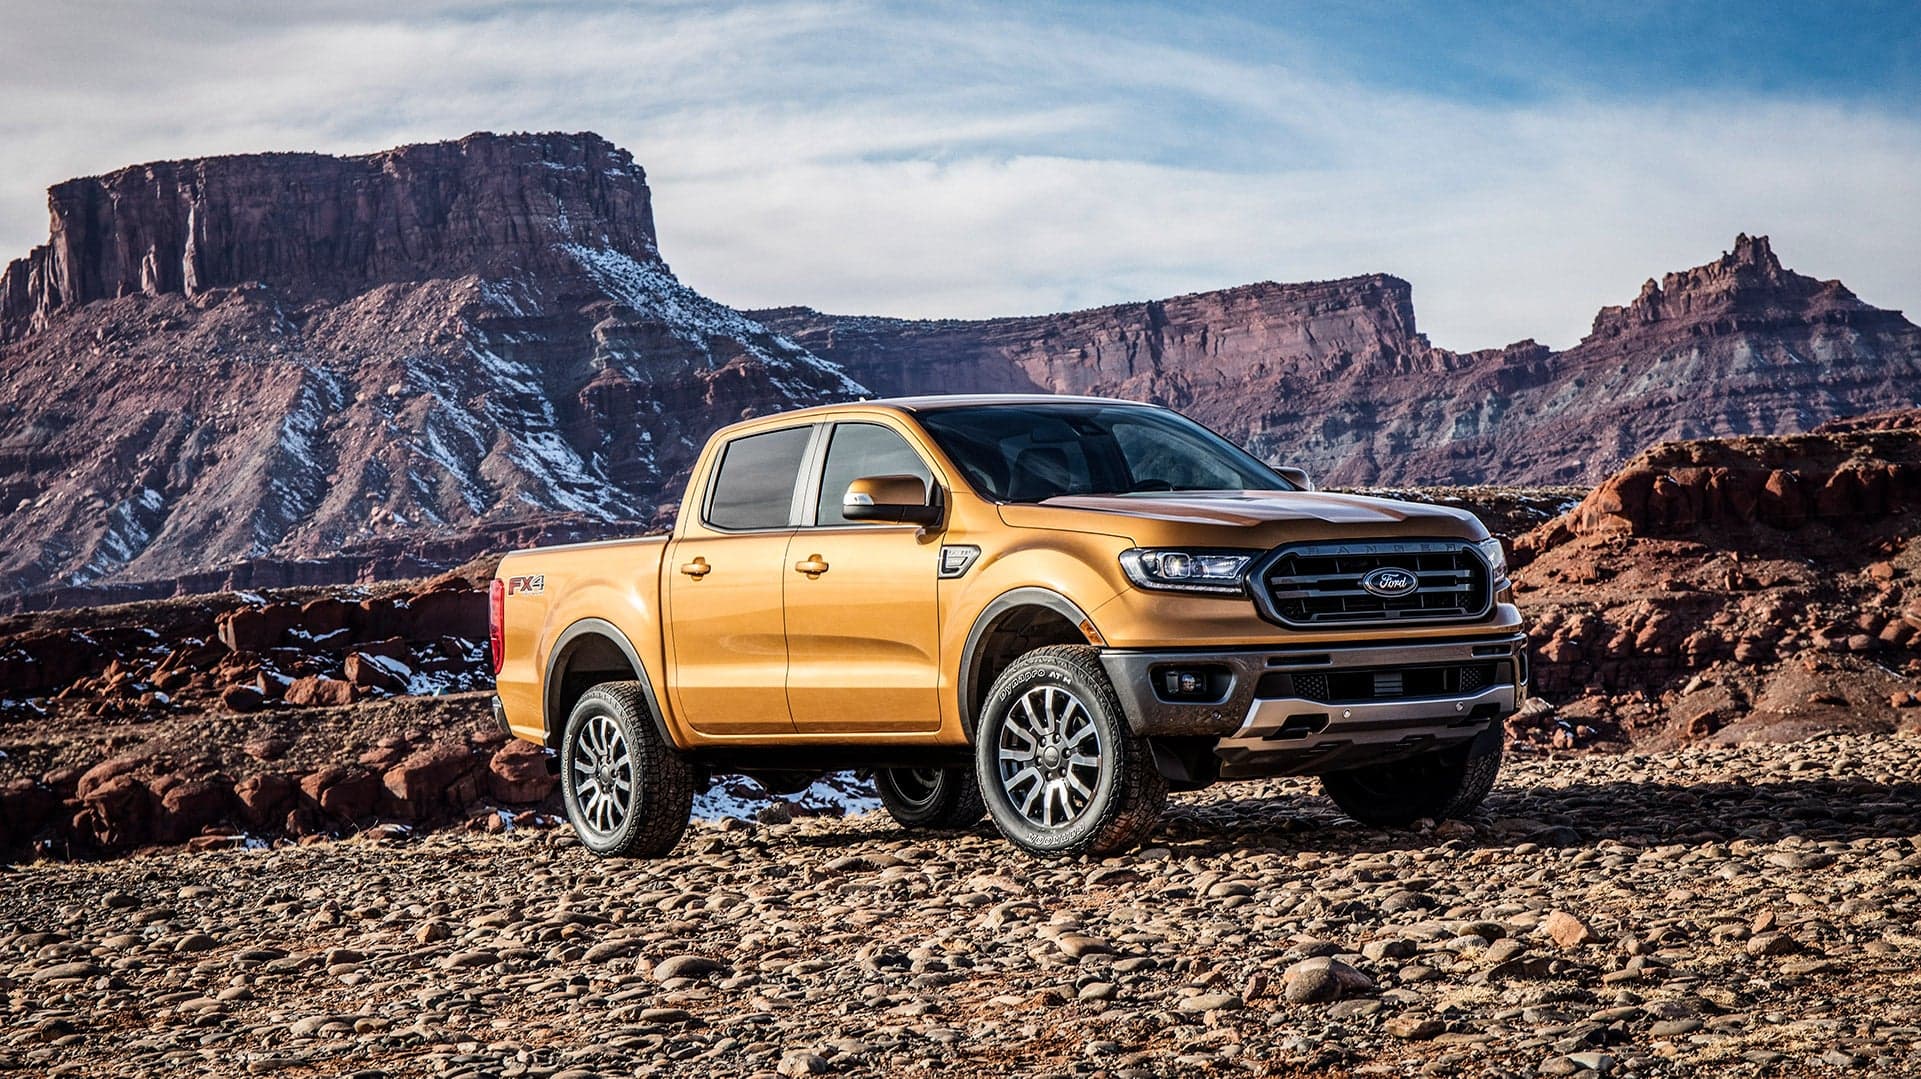 2019 Ford Ranger MPG Figures Released, and They Rule the Midsize Truck Arena